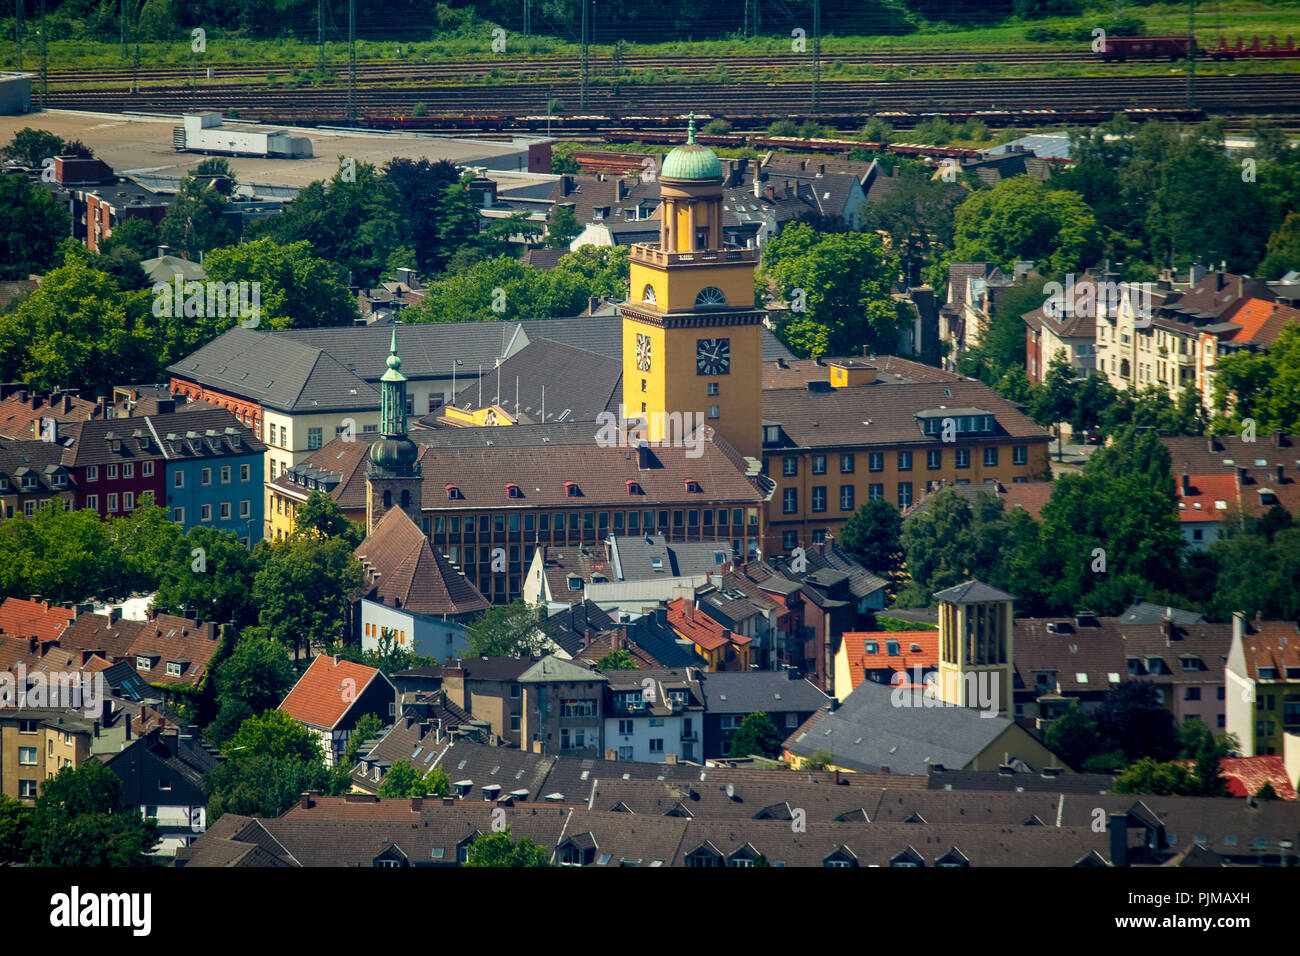 Town hall Witten from Annen photographed with the super telephoto lens, Witten, Ruhr area, North Rhine-Westphalia, Germany Stock Photo